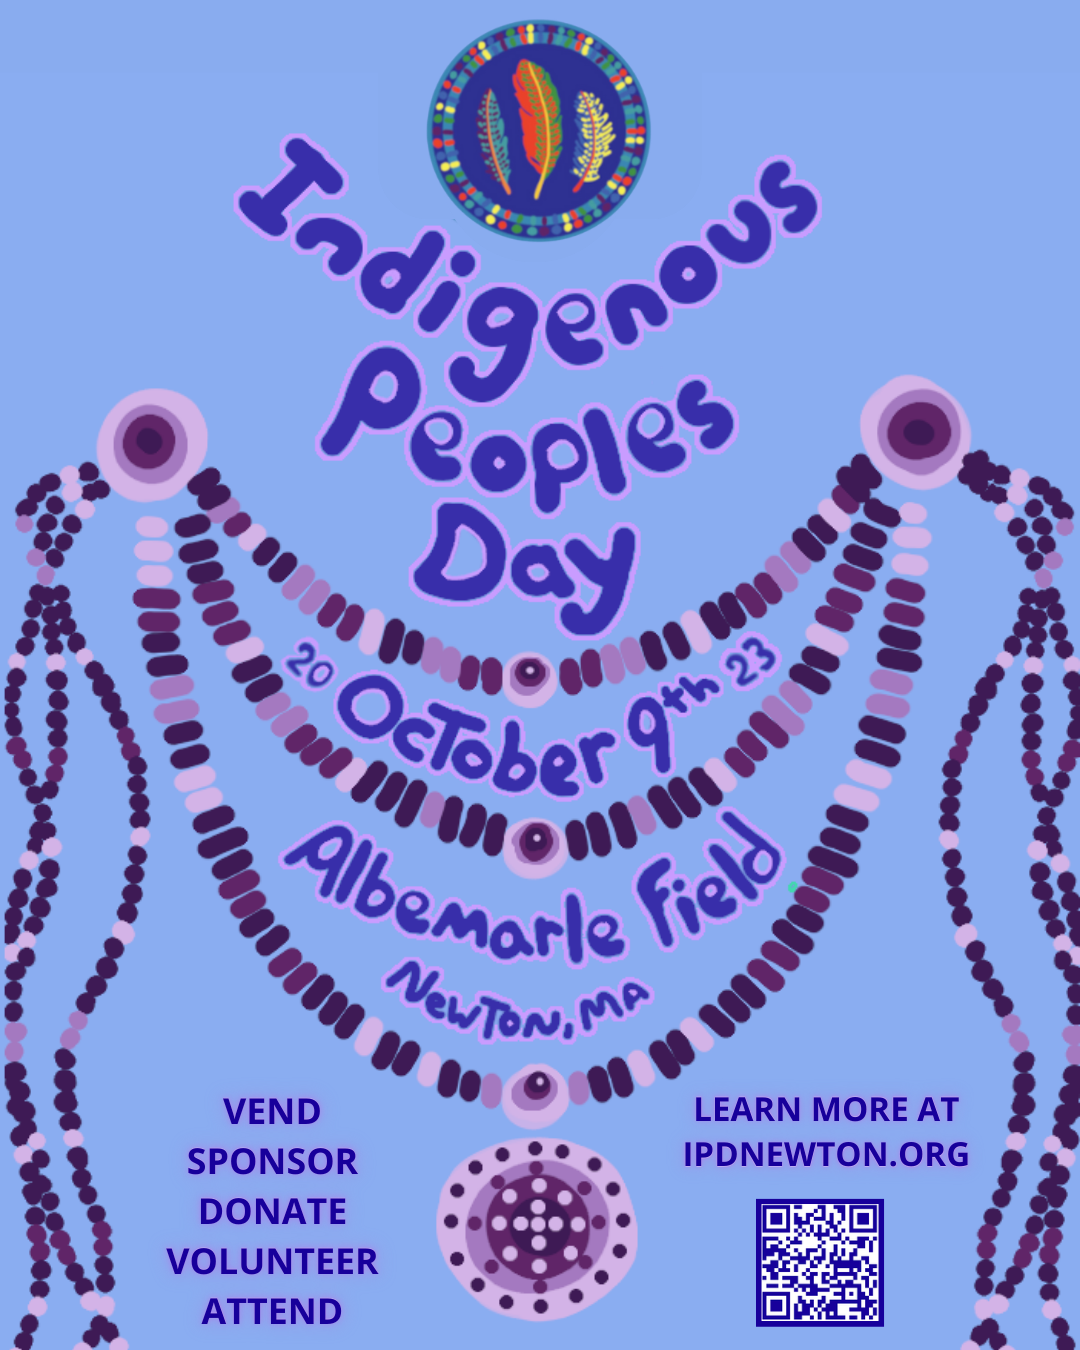 Indigenous Peoples Day is October 11